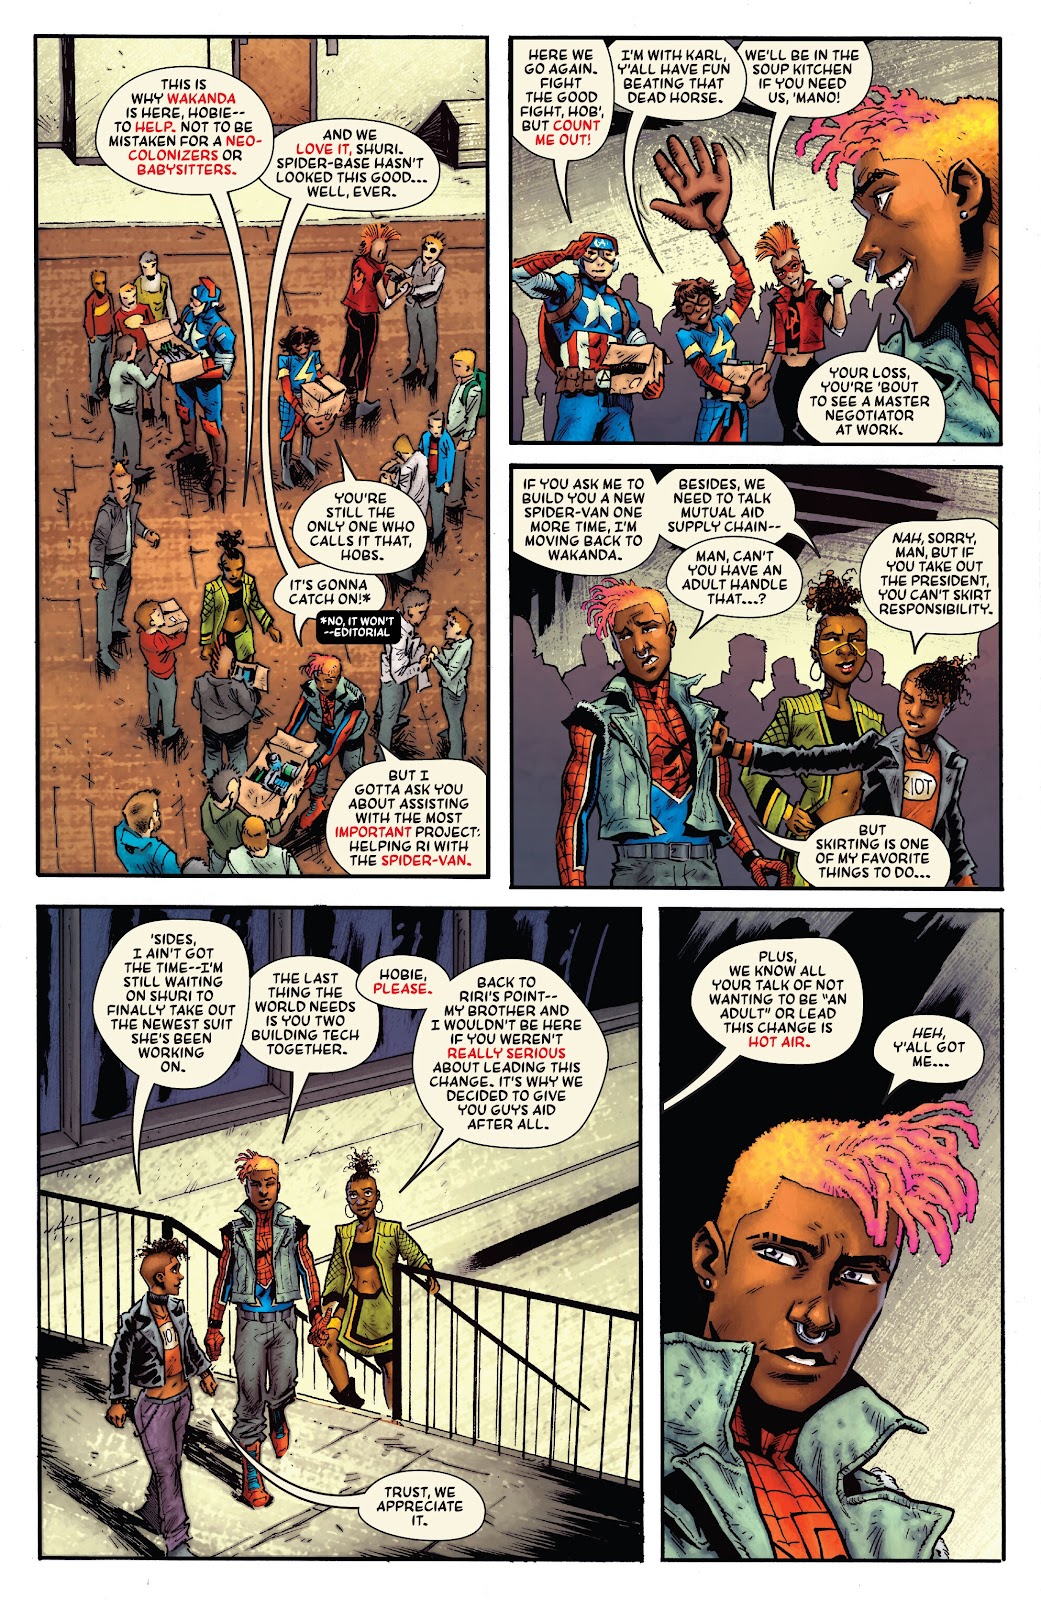 Spider-Punk: Arms Race issue 1 - Page 13